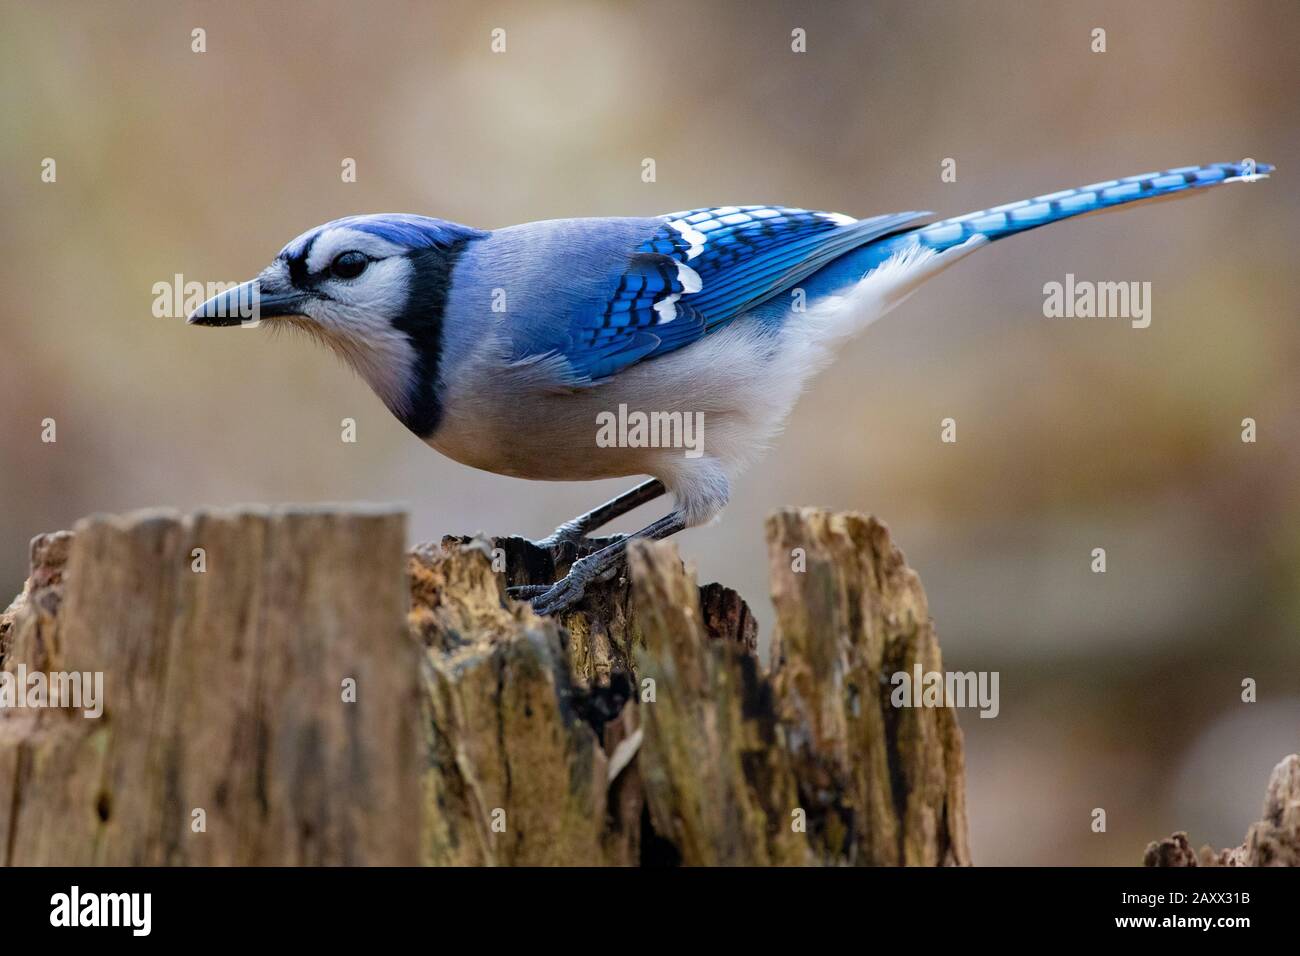 Colourful and majestic blue and white bluejay perched on a fallen tree stump Stock Photo